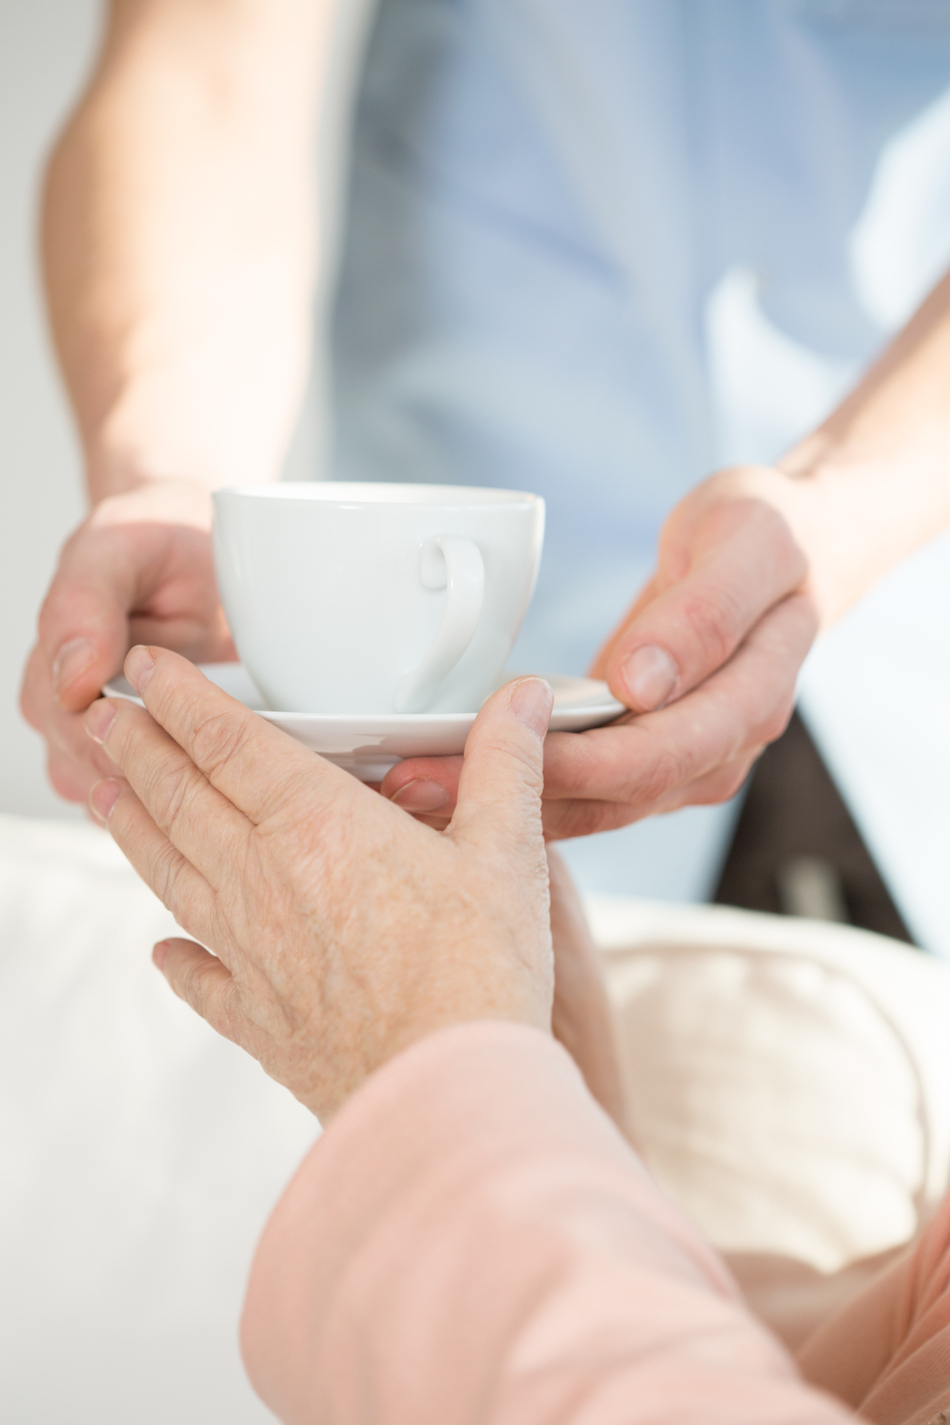 A Cup of Coffee After Surgery May Get You Home Faster